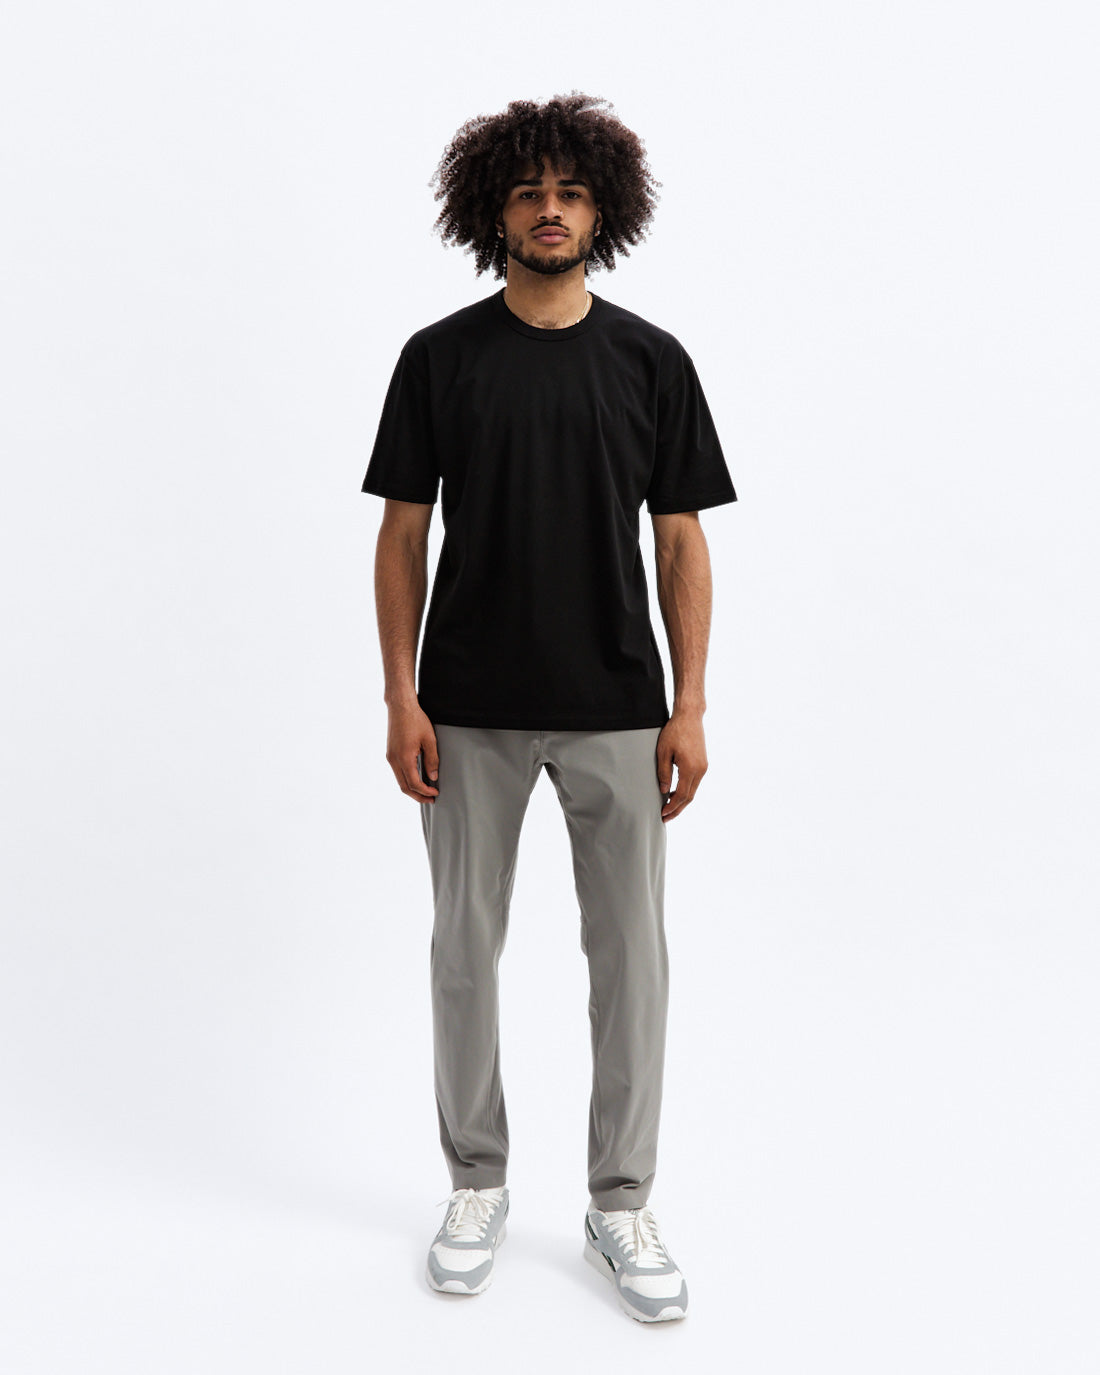 Copper Jersey Classic T-shirt | Reigning Champ